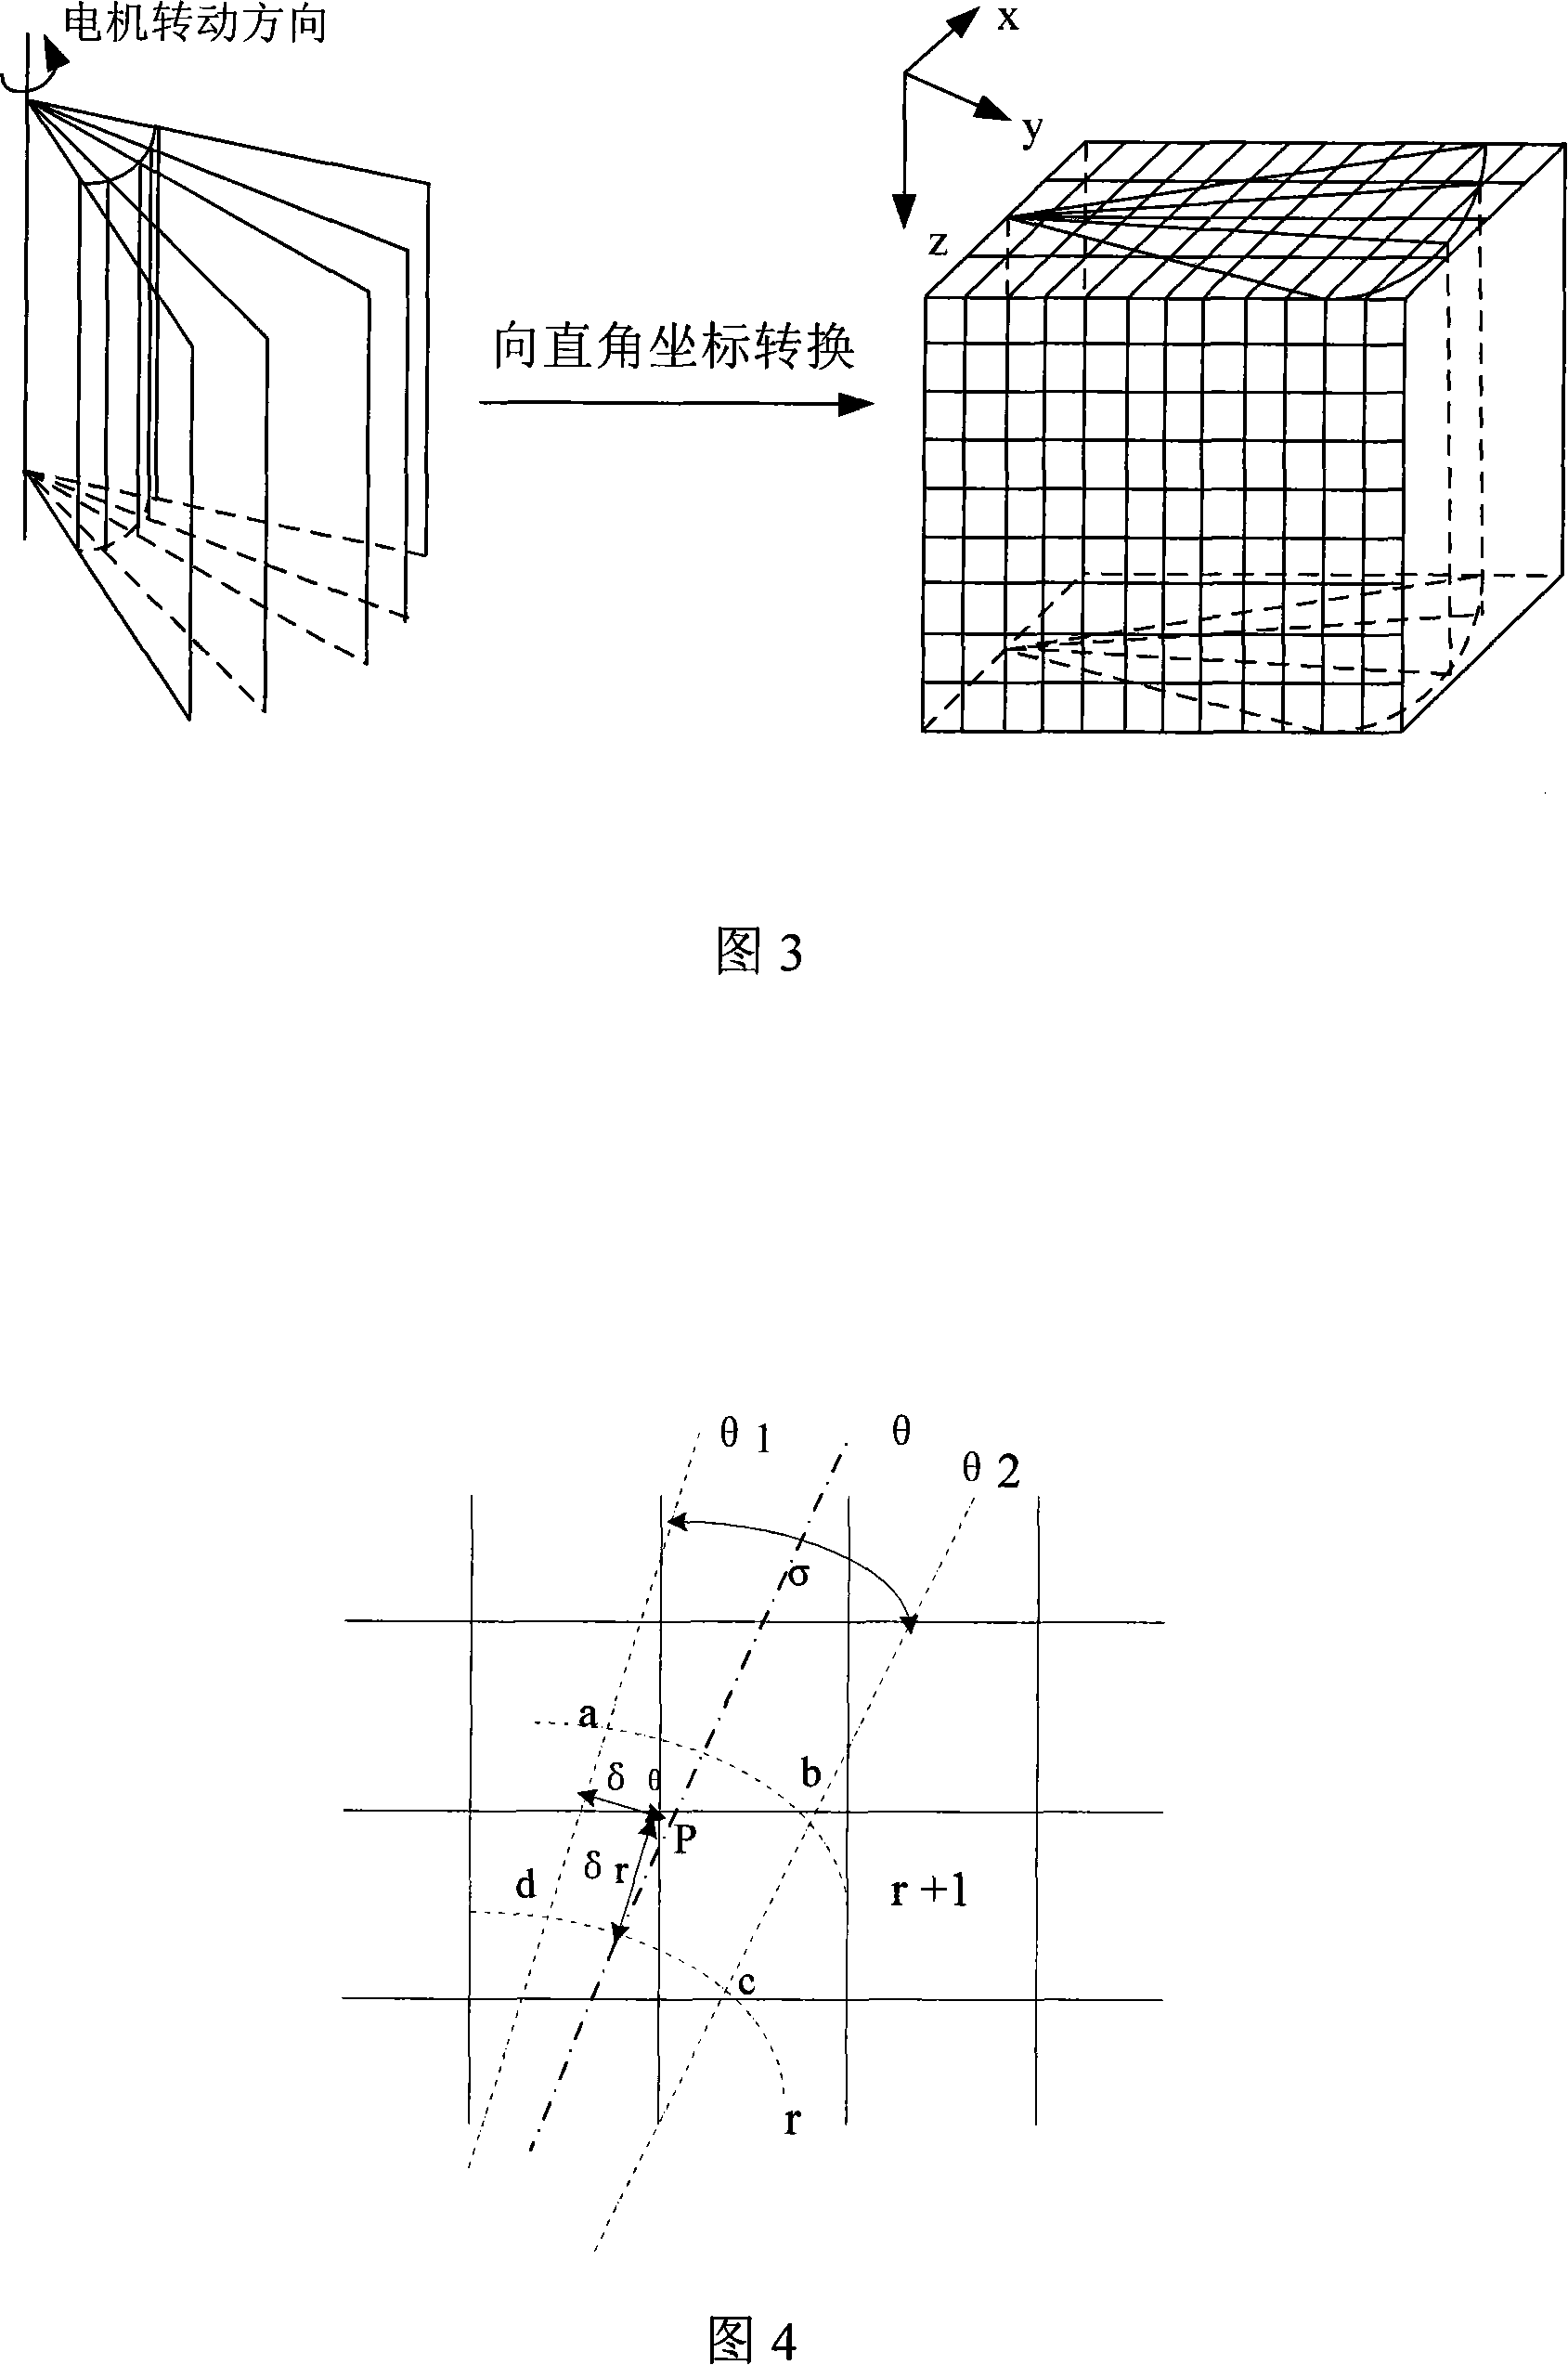 Mechanical scanning realtime three-dimension ultrasonic imaging system and method